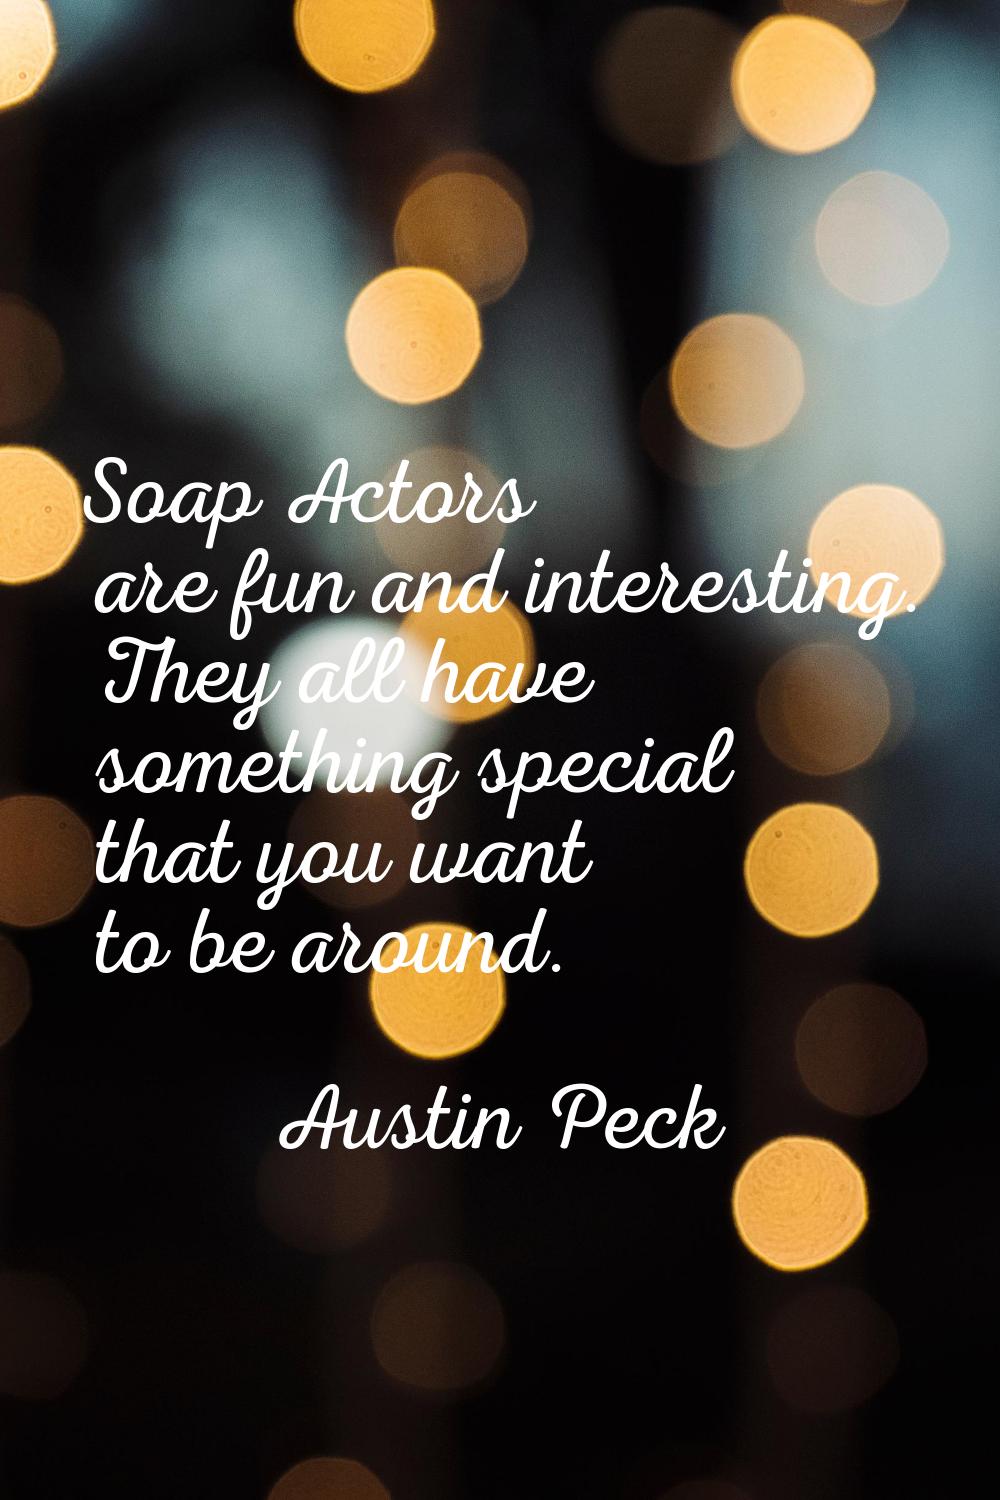 Soap Actors are fun and interesting. They all have something special that you want to be around.